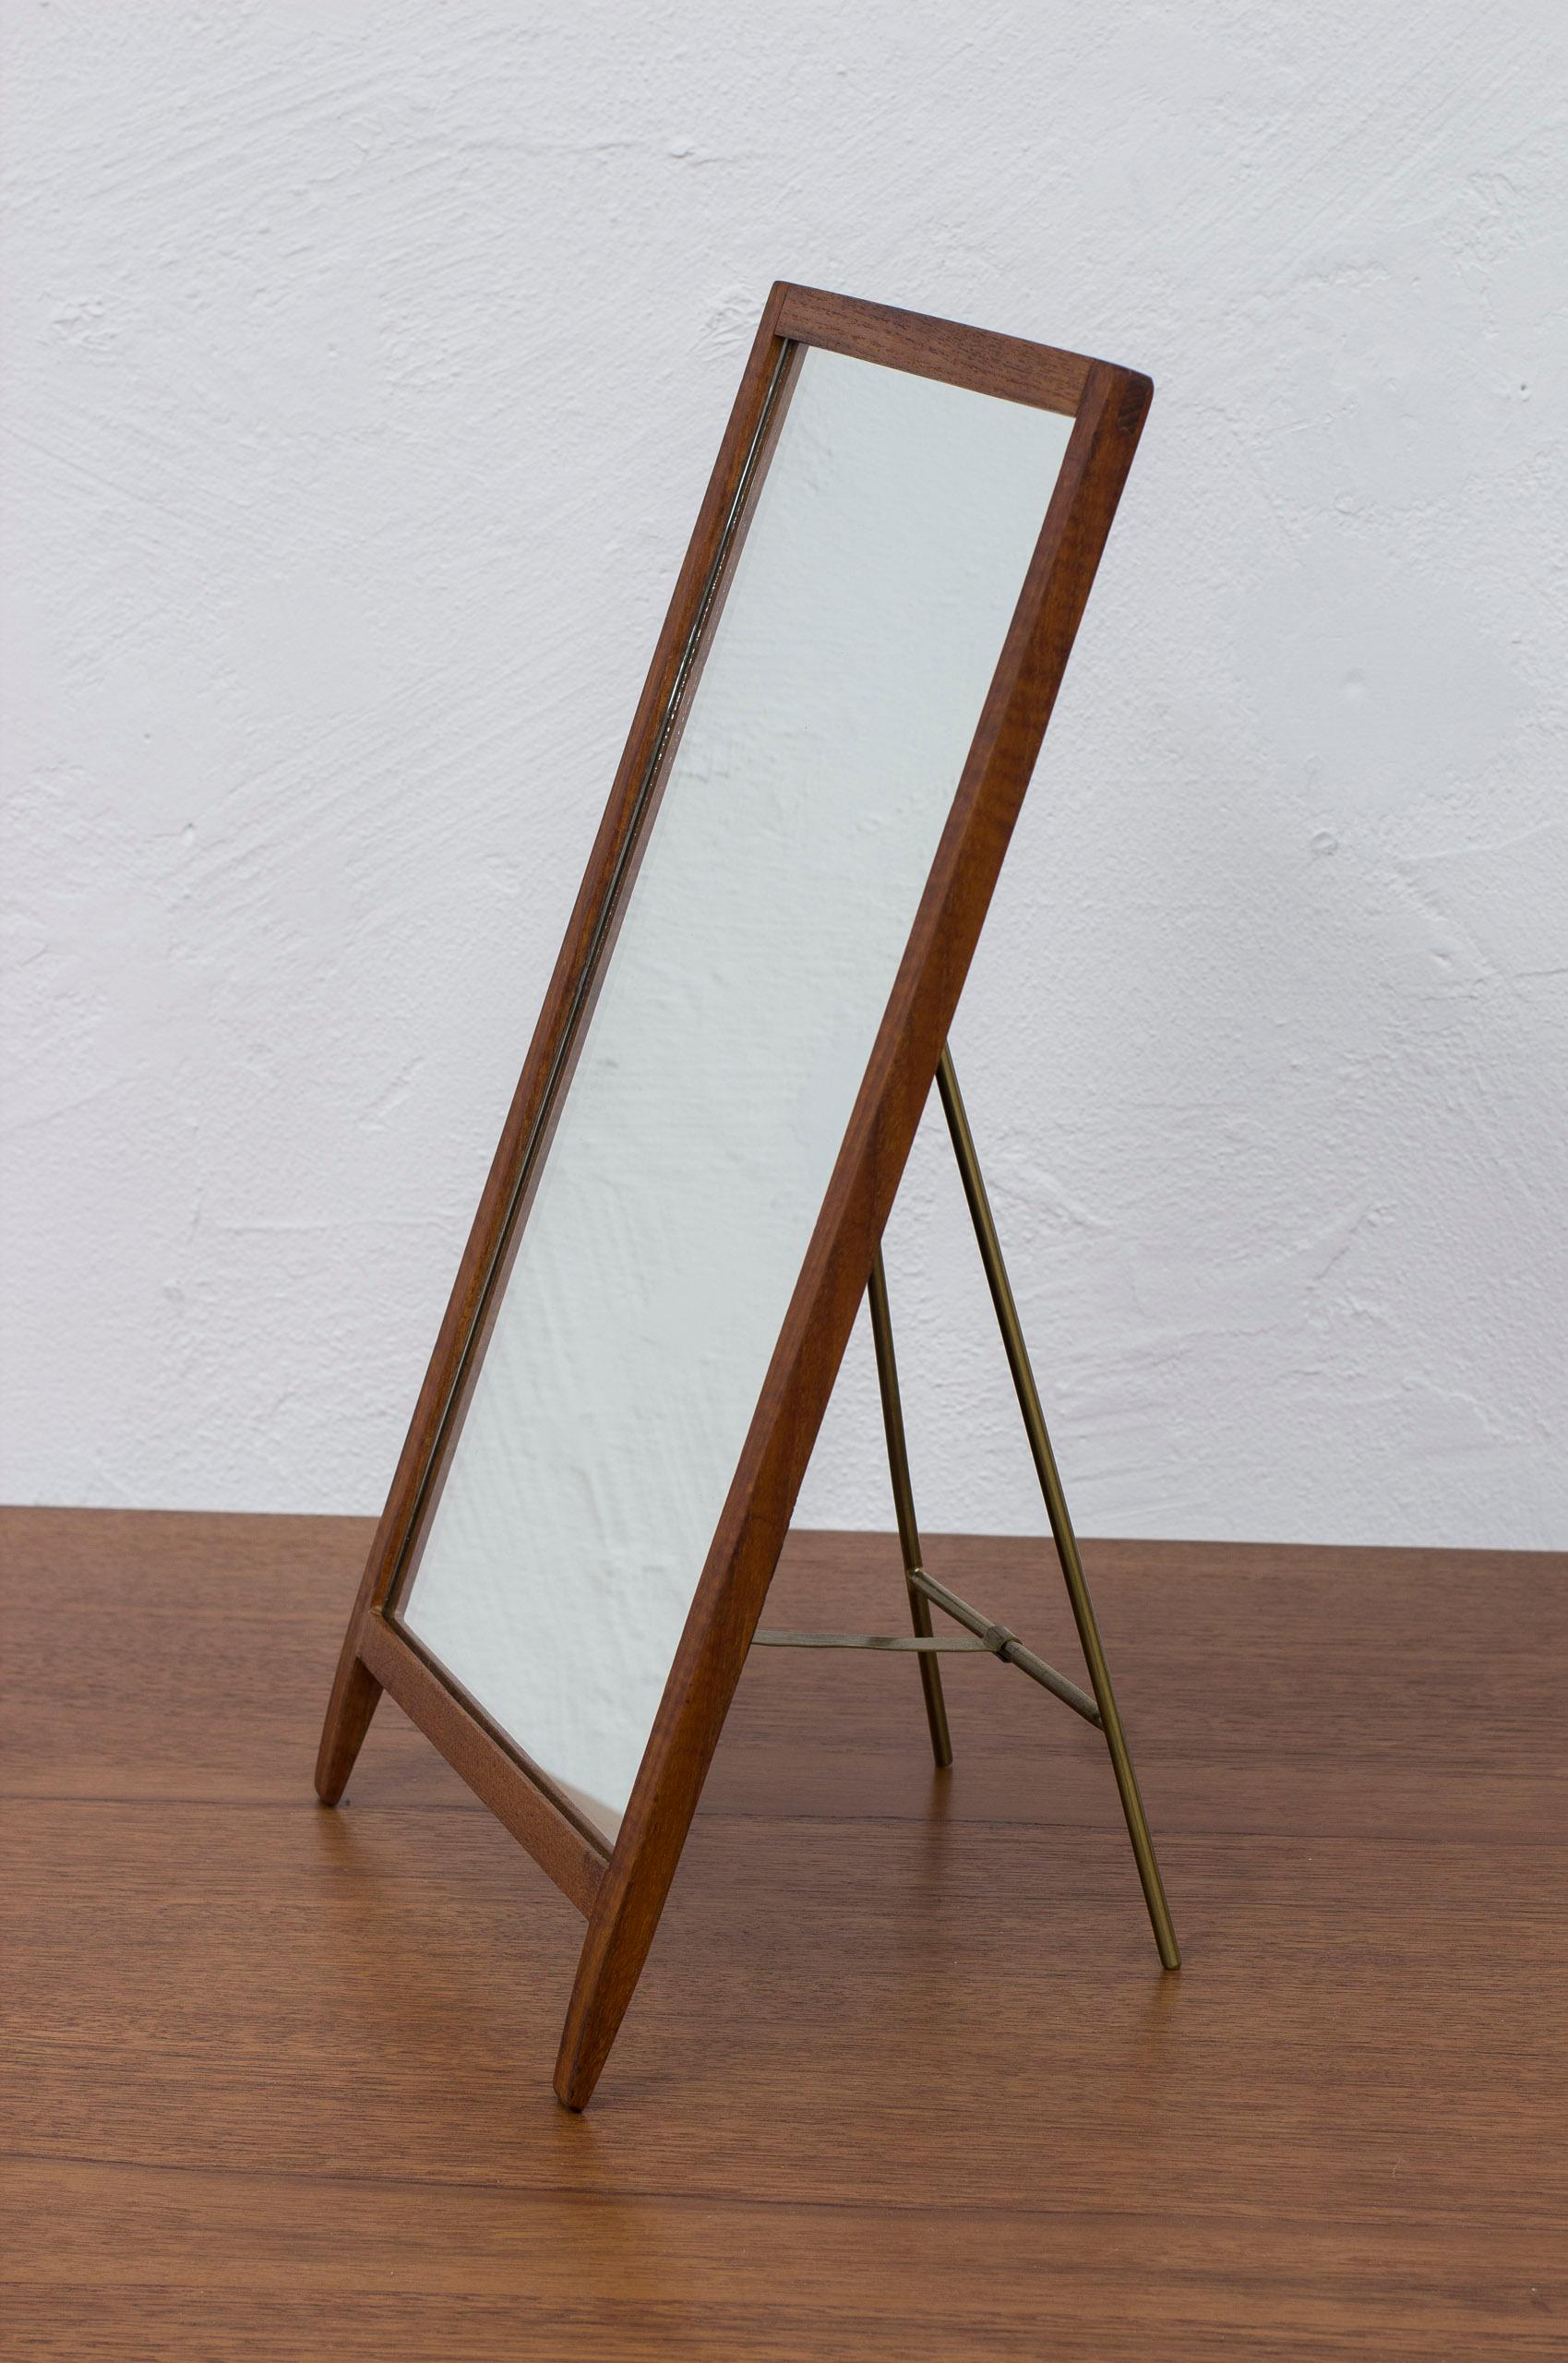 Table mirror designed by Hans-Agne Jakobsson. Early production from his period in Åhus, 1950s. Made from solid teak with brass stand and black lacquered wooden back part. Very good vintage condition with light age related wear and